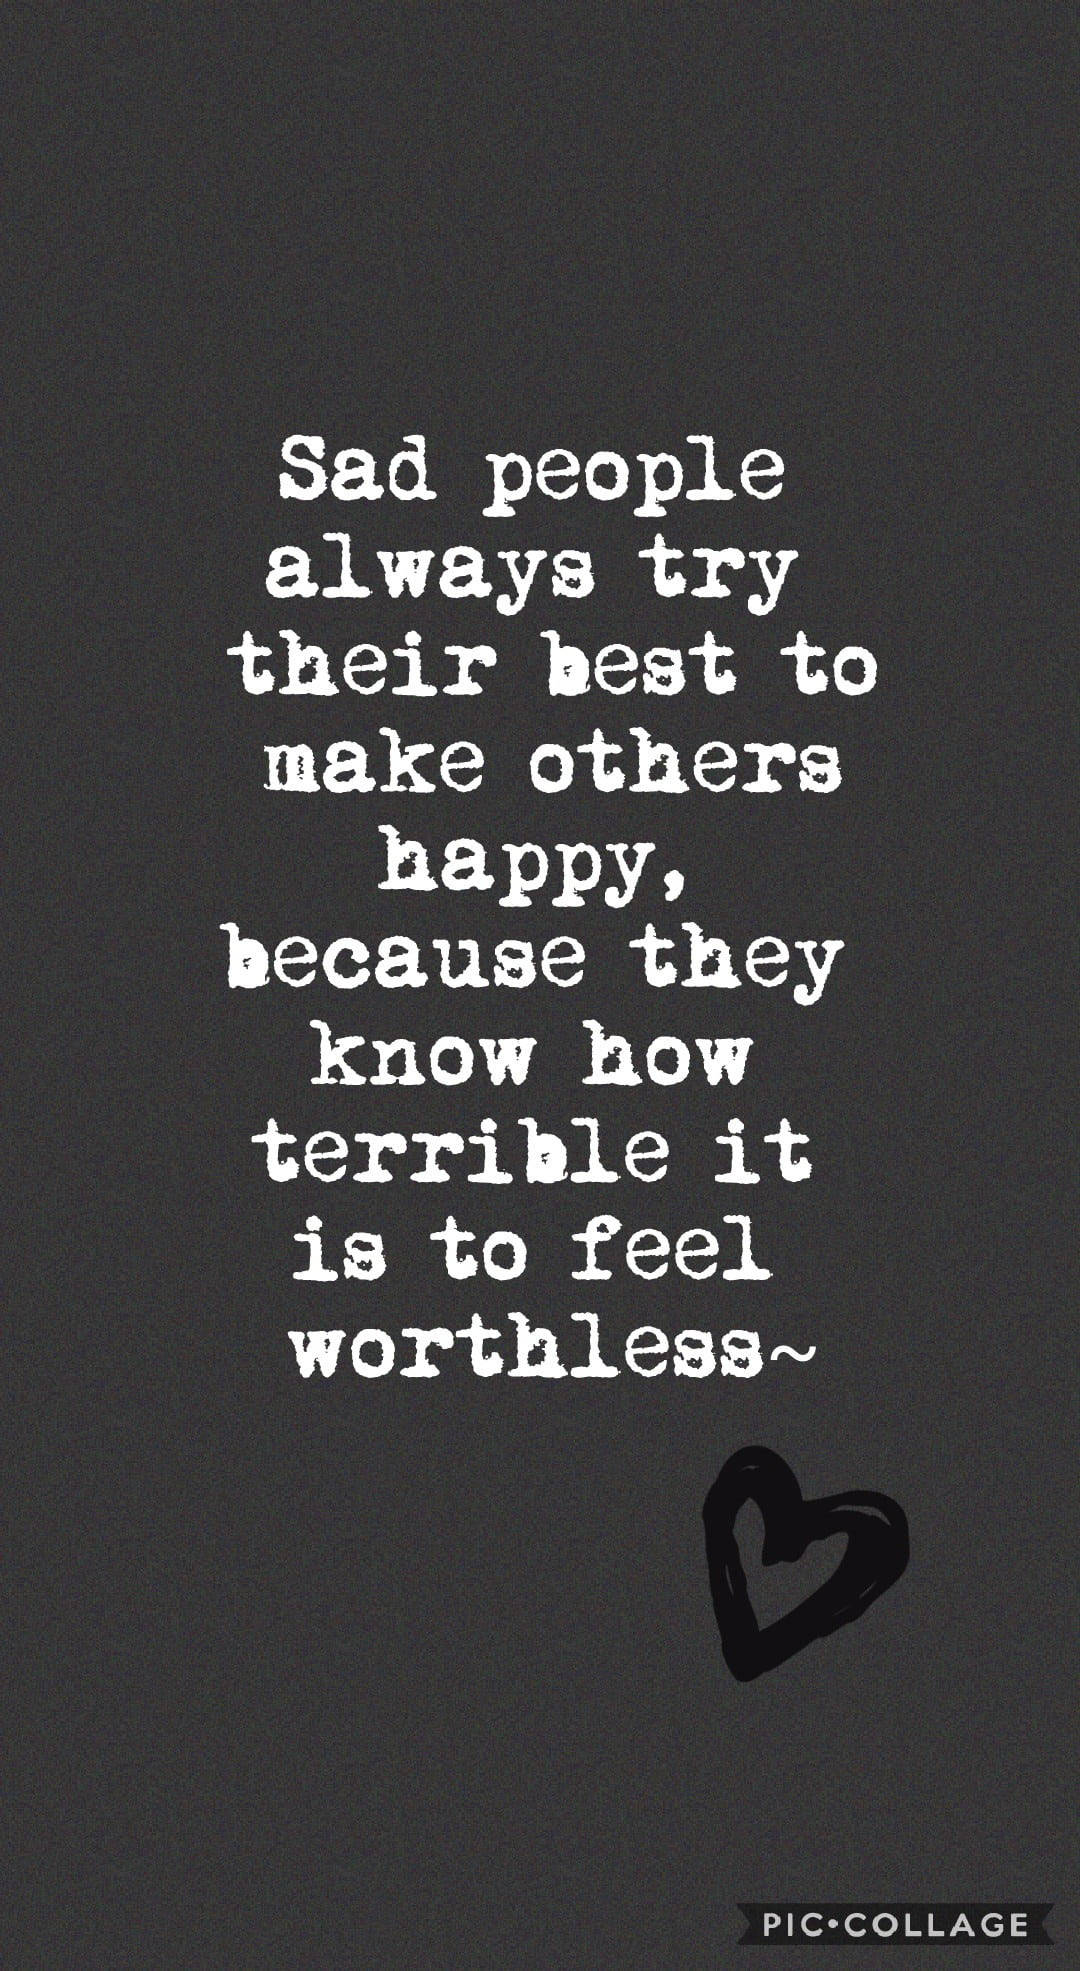 Download Lonely Quotes Sad People Wallpaper | Wallpapers.com